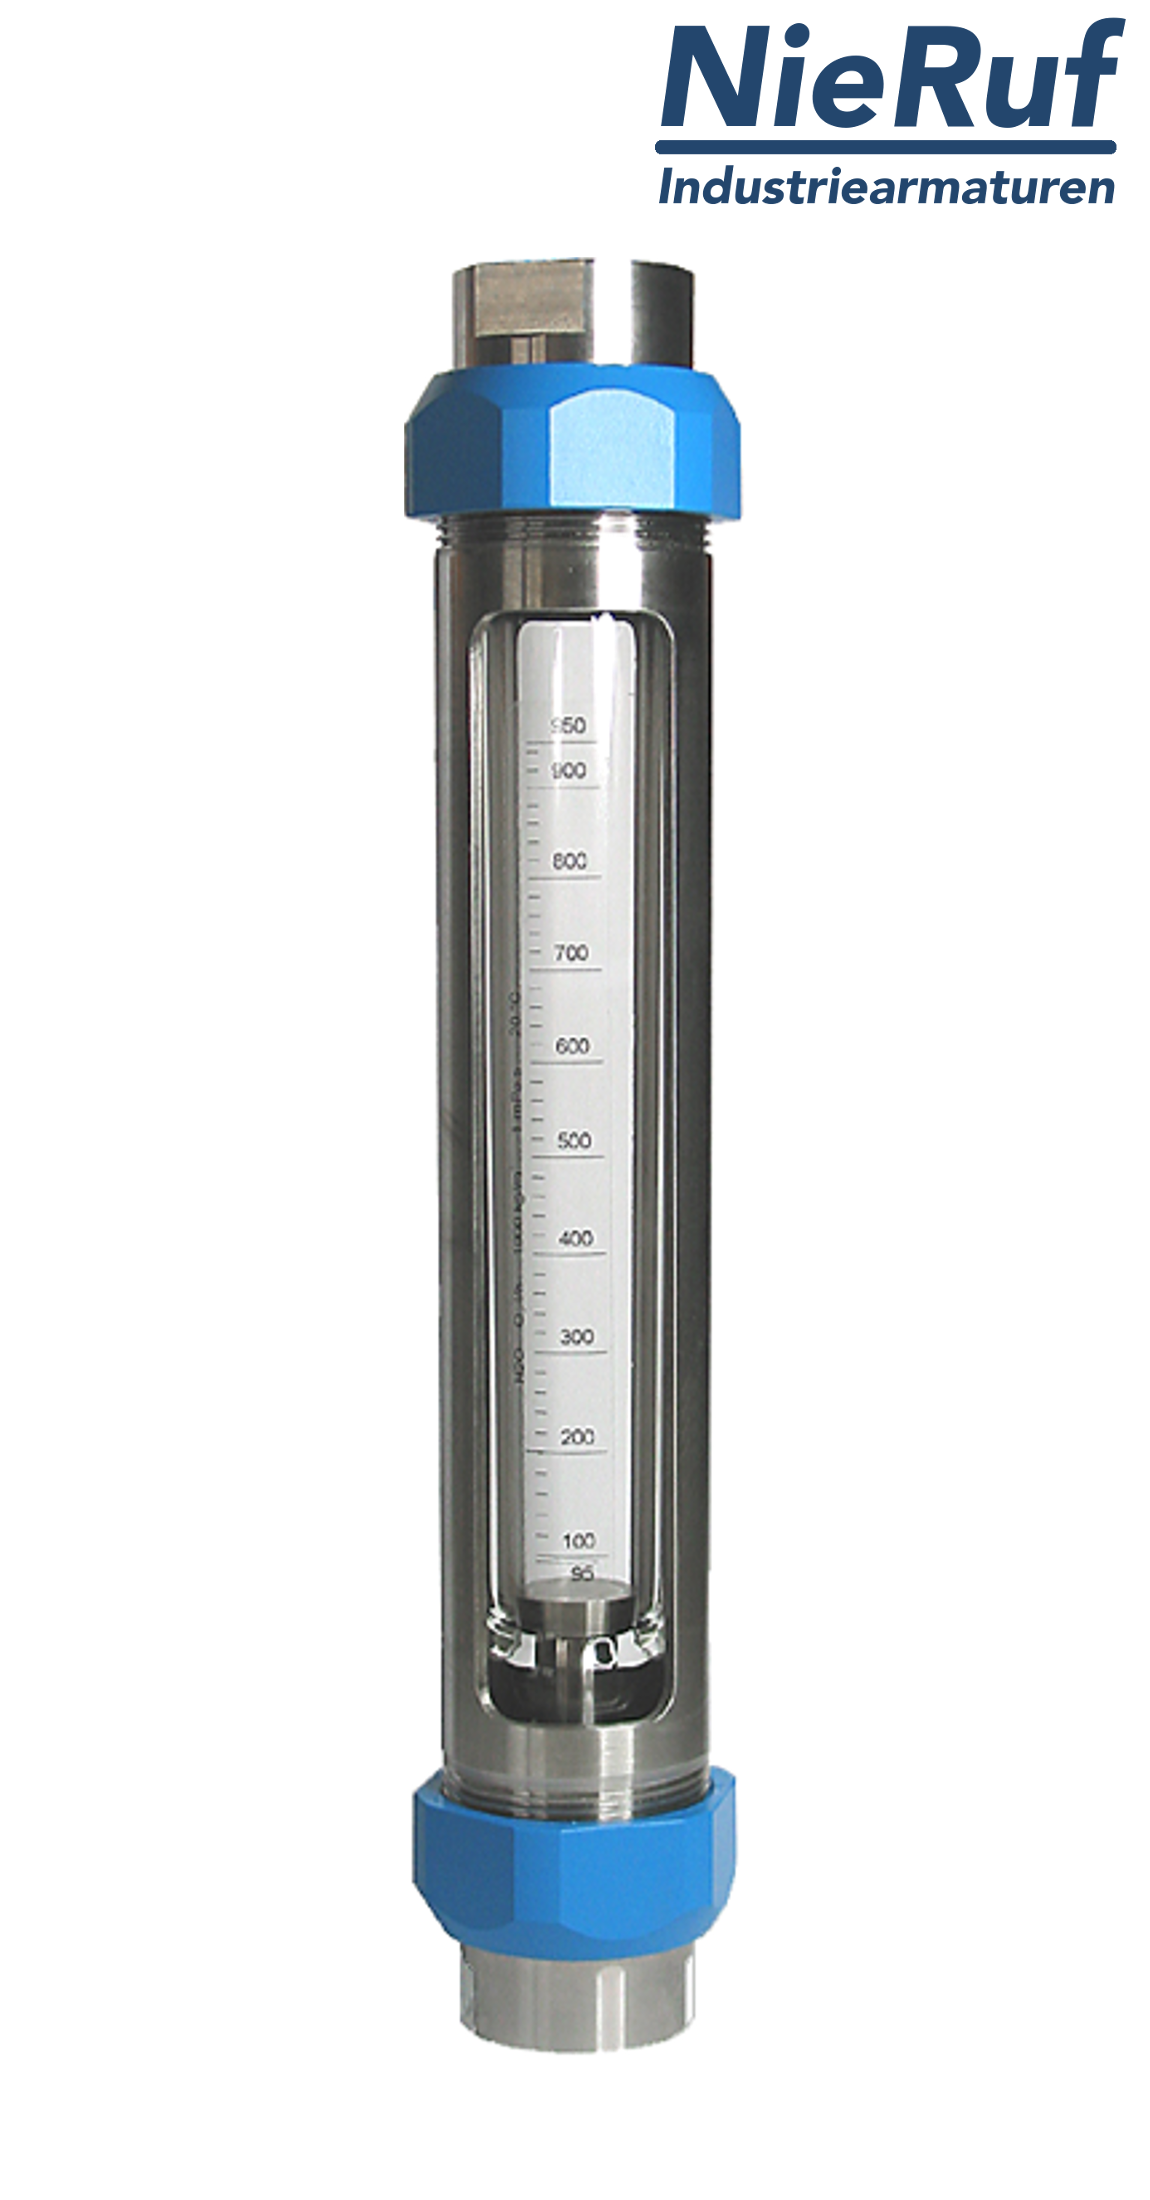 Variable area flowmeter stainless steel + borosilicate 1/2" inch 250.0 - 2500 l/h water FKM